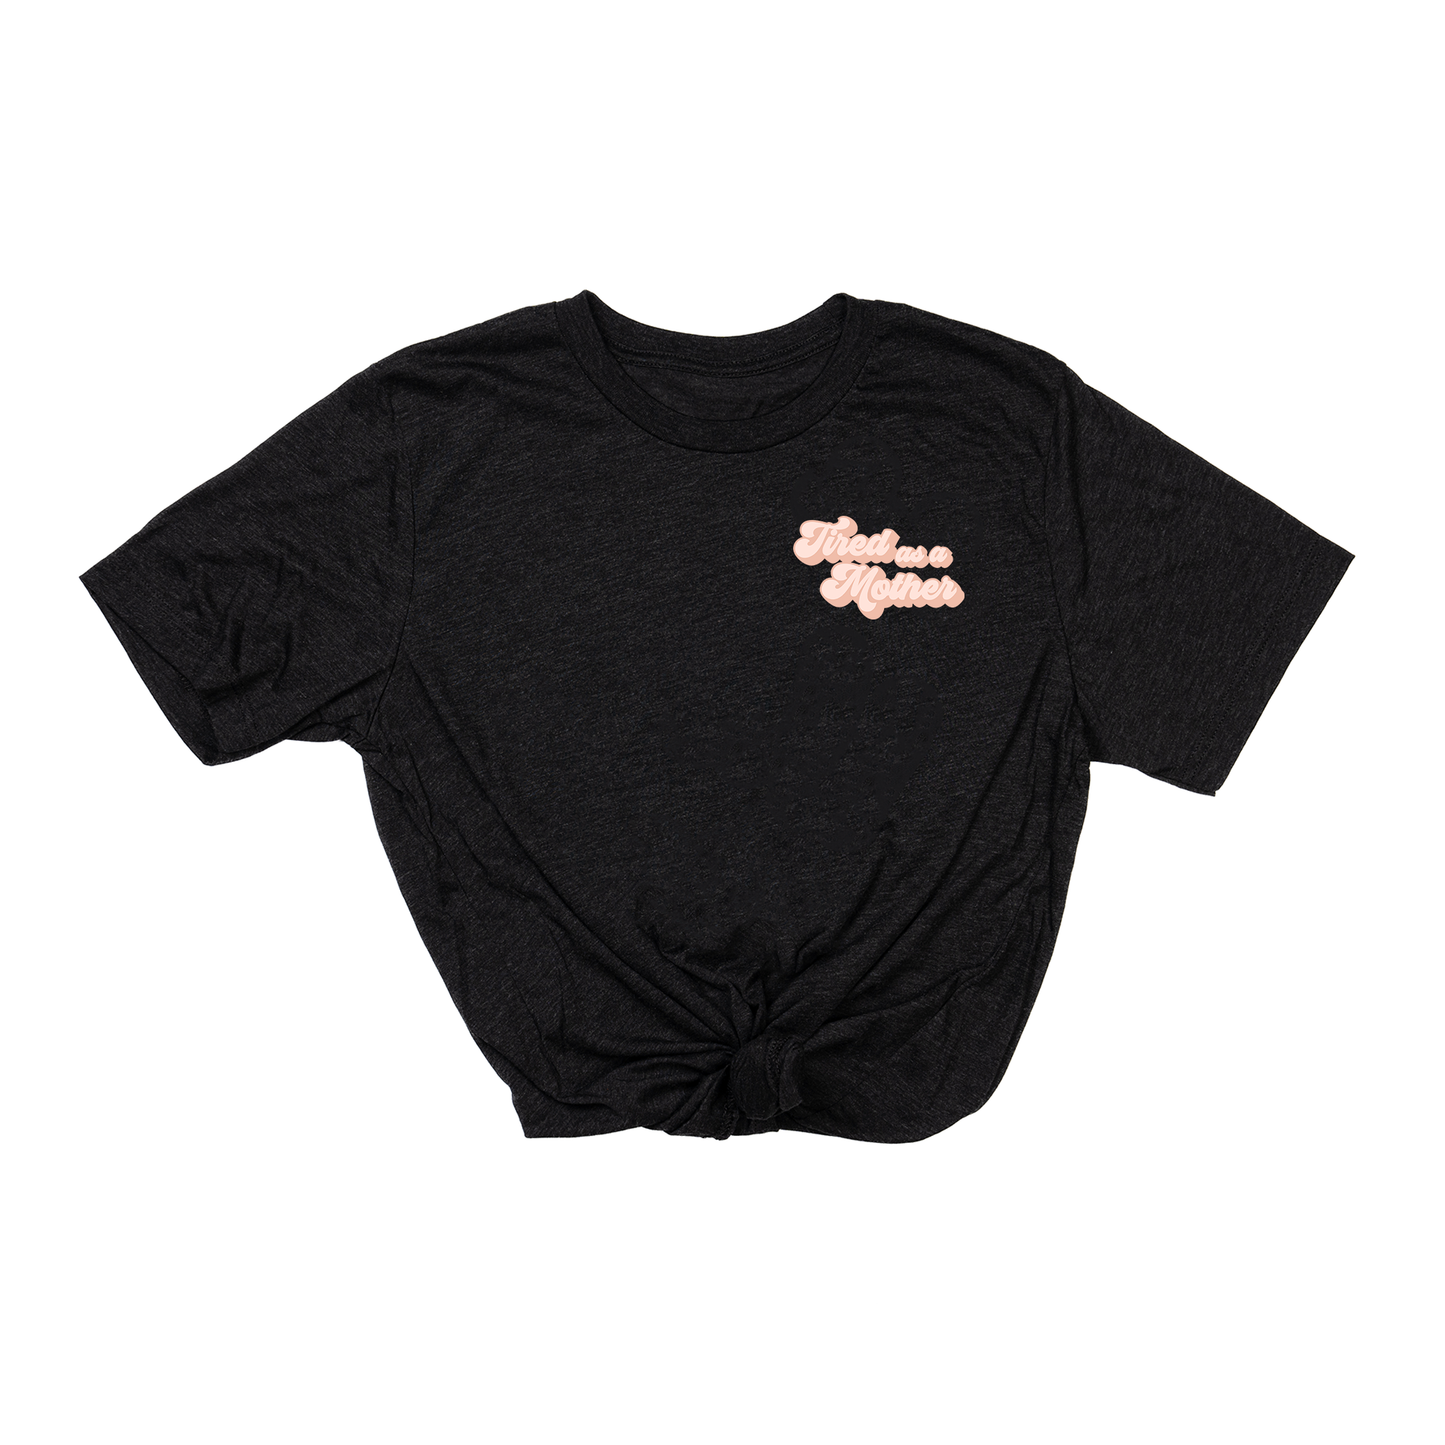 Tired as a Mother (Pocket) - Tee (Charcoal Black)